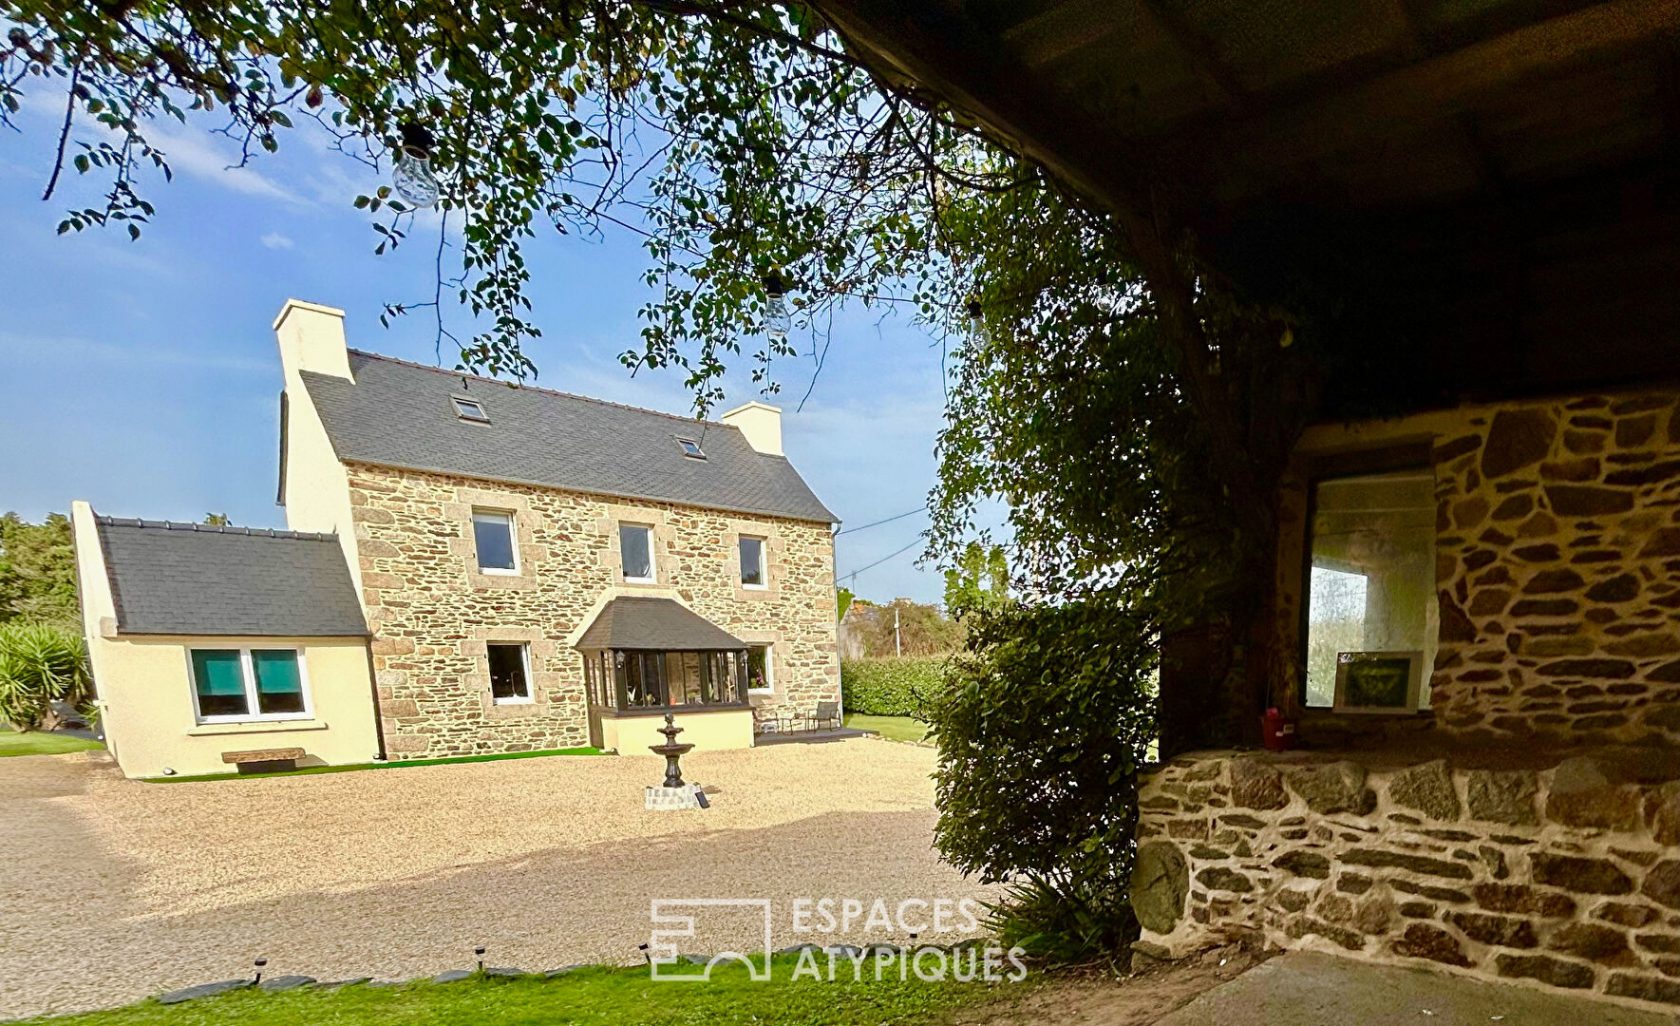 Renovated farmhouse with its stone outbuildings